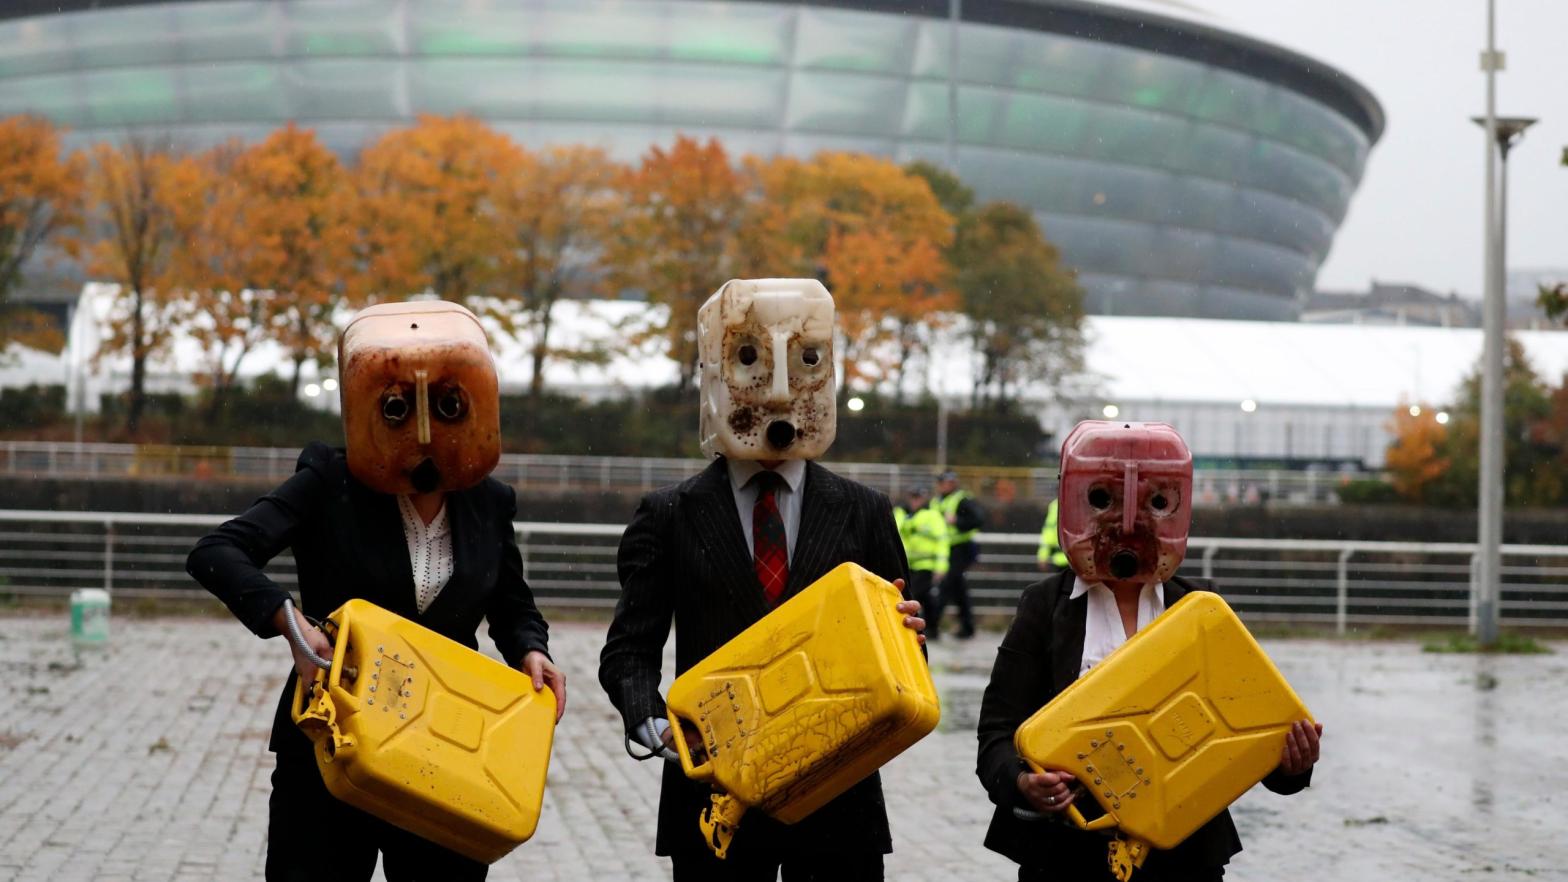 Activists hold jerrycans after spilling fake oil during their performance near the venue where the U.N. climate conference is being held in Glasgow, Scotland. (Photo: Scott Heppell, AP)